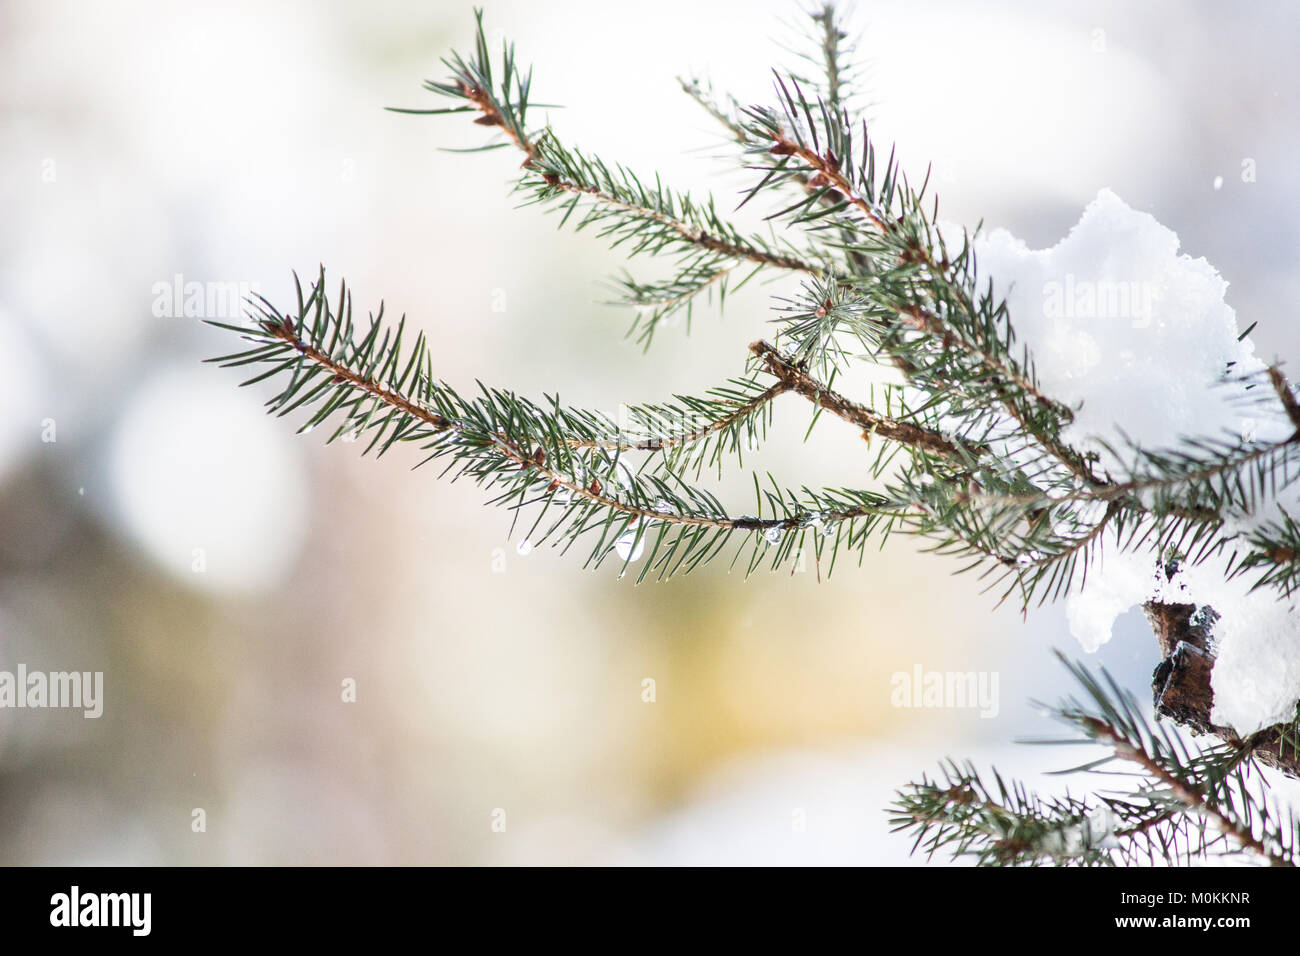 23 January 18 Leaves Of Norway Spruce Picea Abies Covered With Snow And Water Drop Stock Photo Alamy